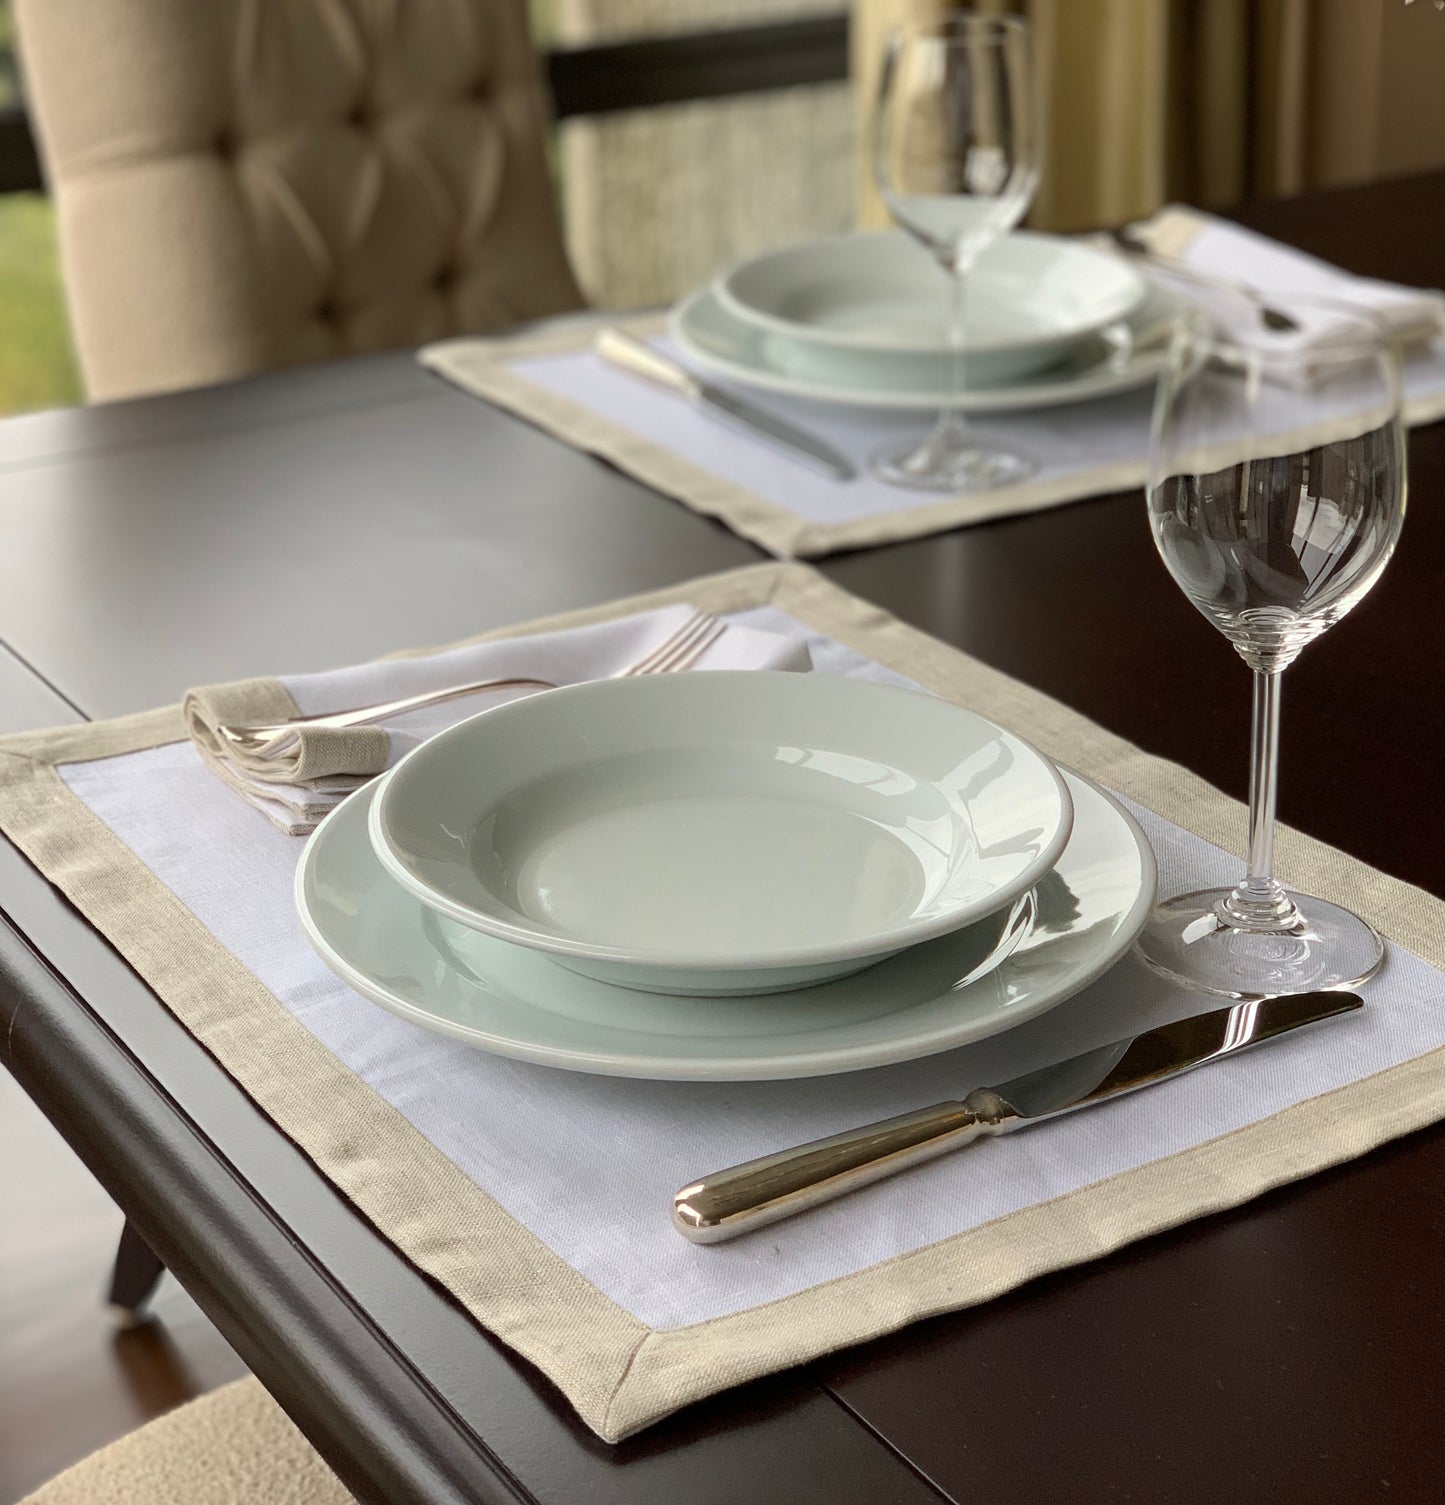 Set of 4 Contrast Border Placemat Oatmeal/White